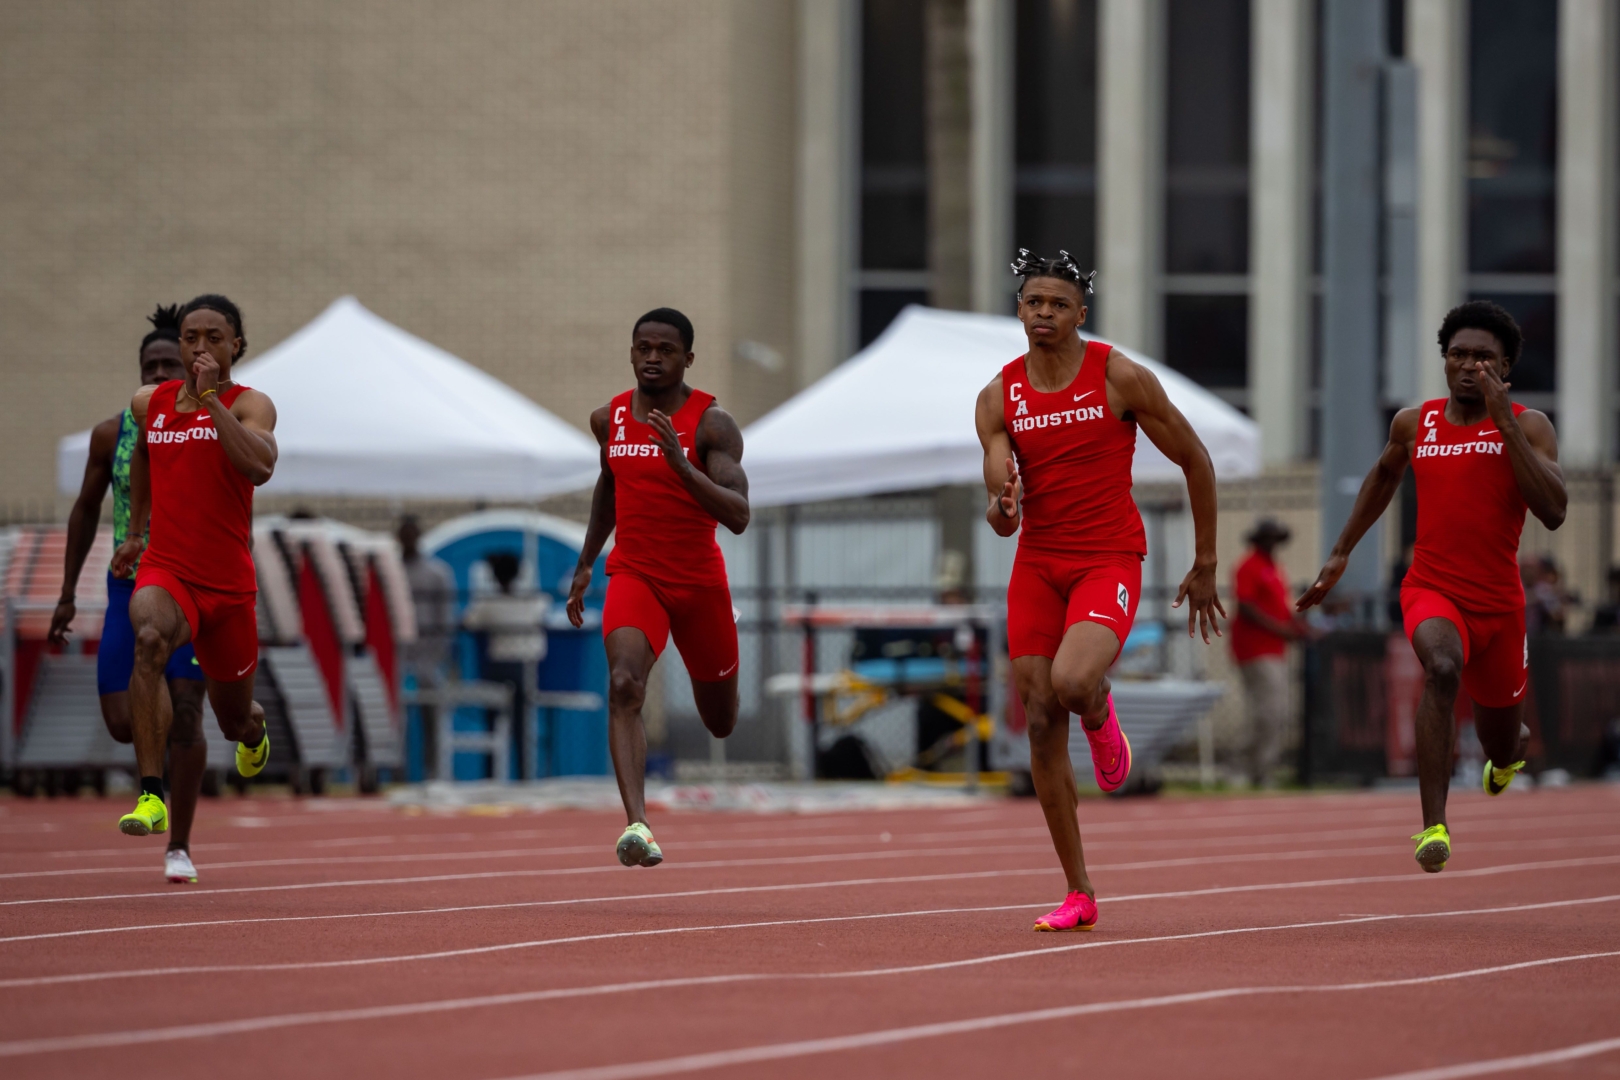 The Cougars won seven events, including a meet record by senior sprinter Cecilia Tamayo-Garza in the 100-meter dash, at the Kirk Baptiste Spring Break Invitational. | Joe Buvid/UH Athletics